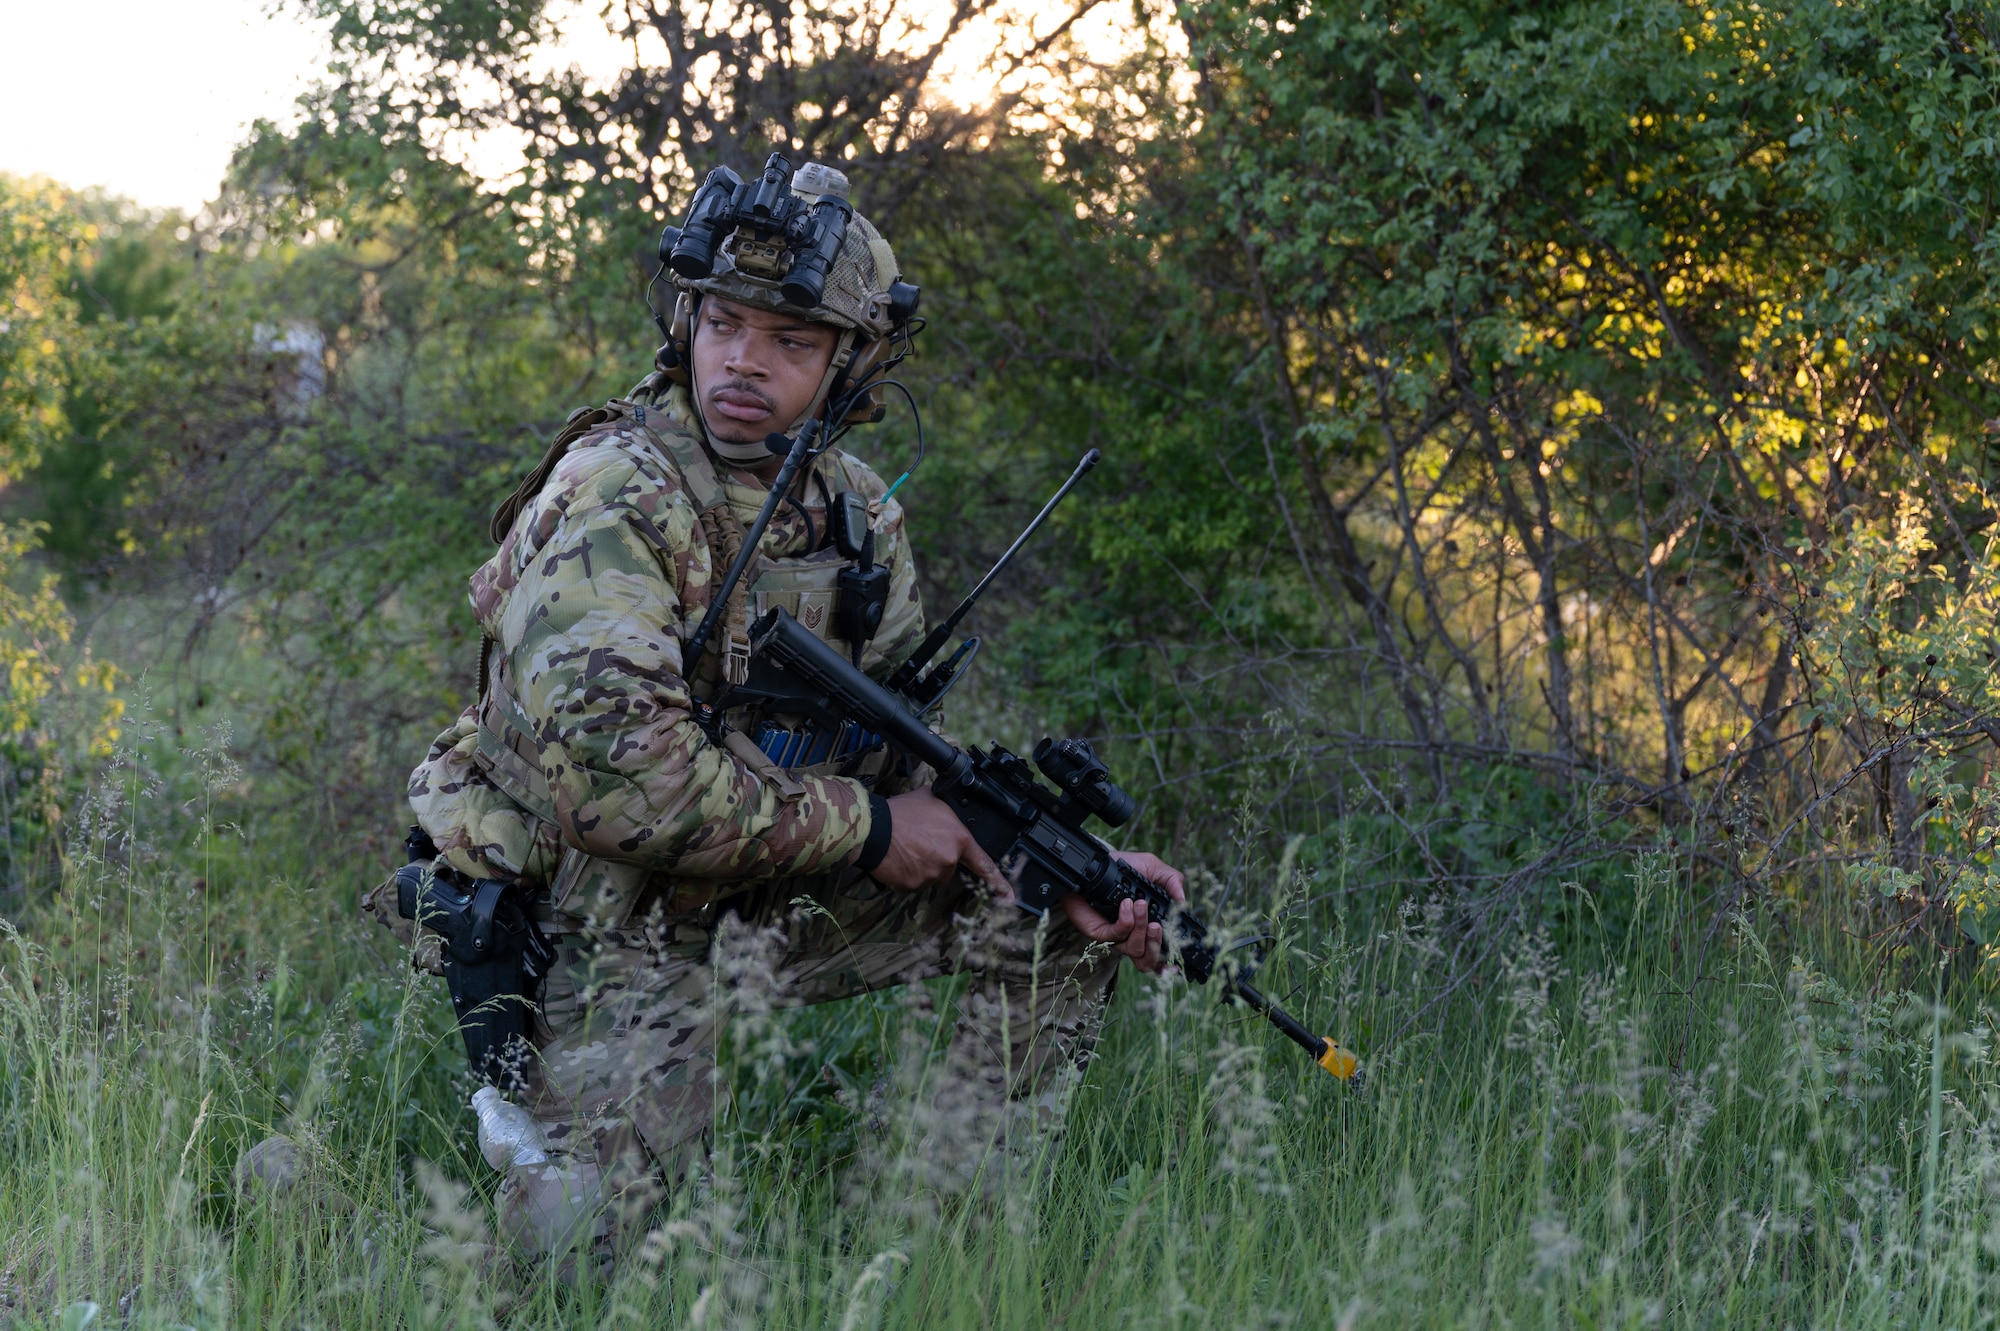 An airman standing in a field with combat gear.